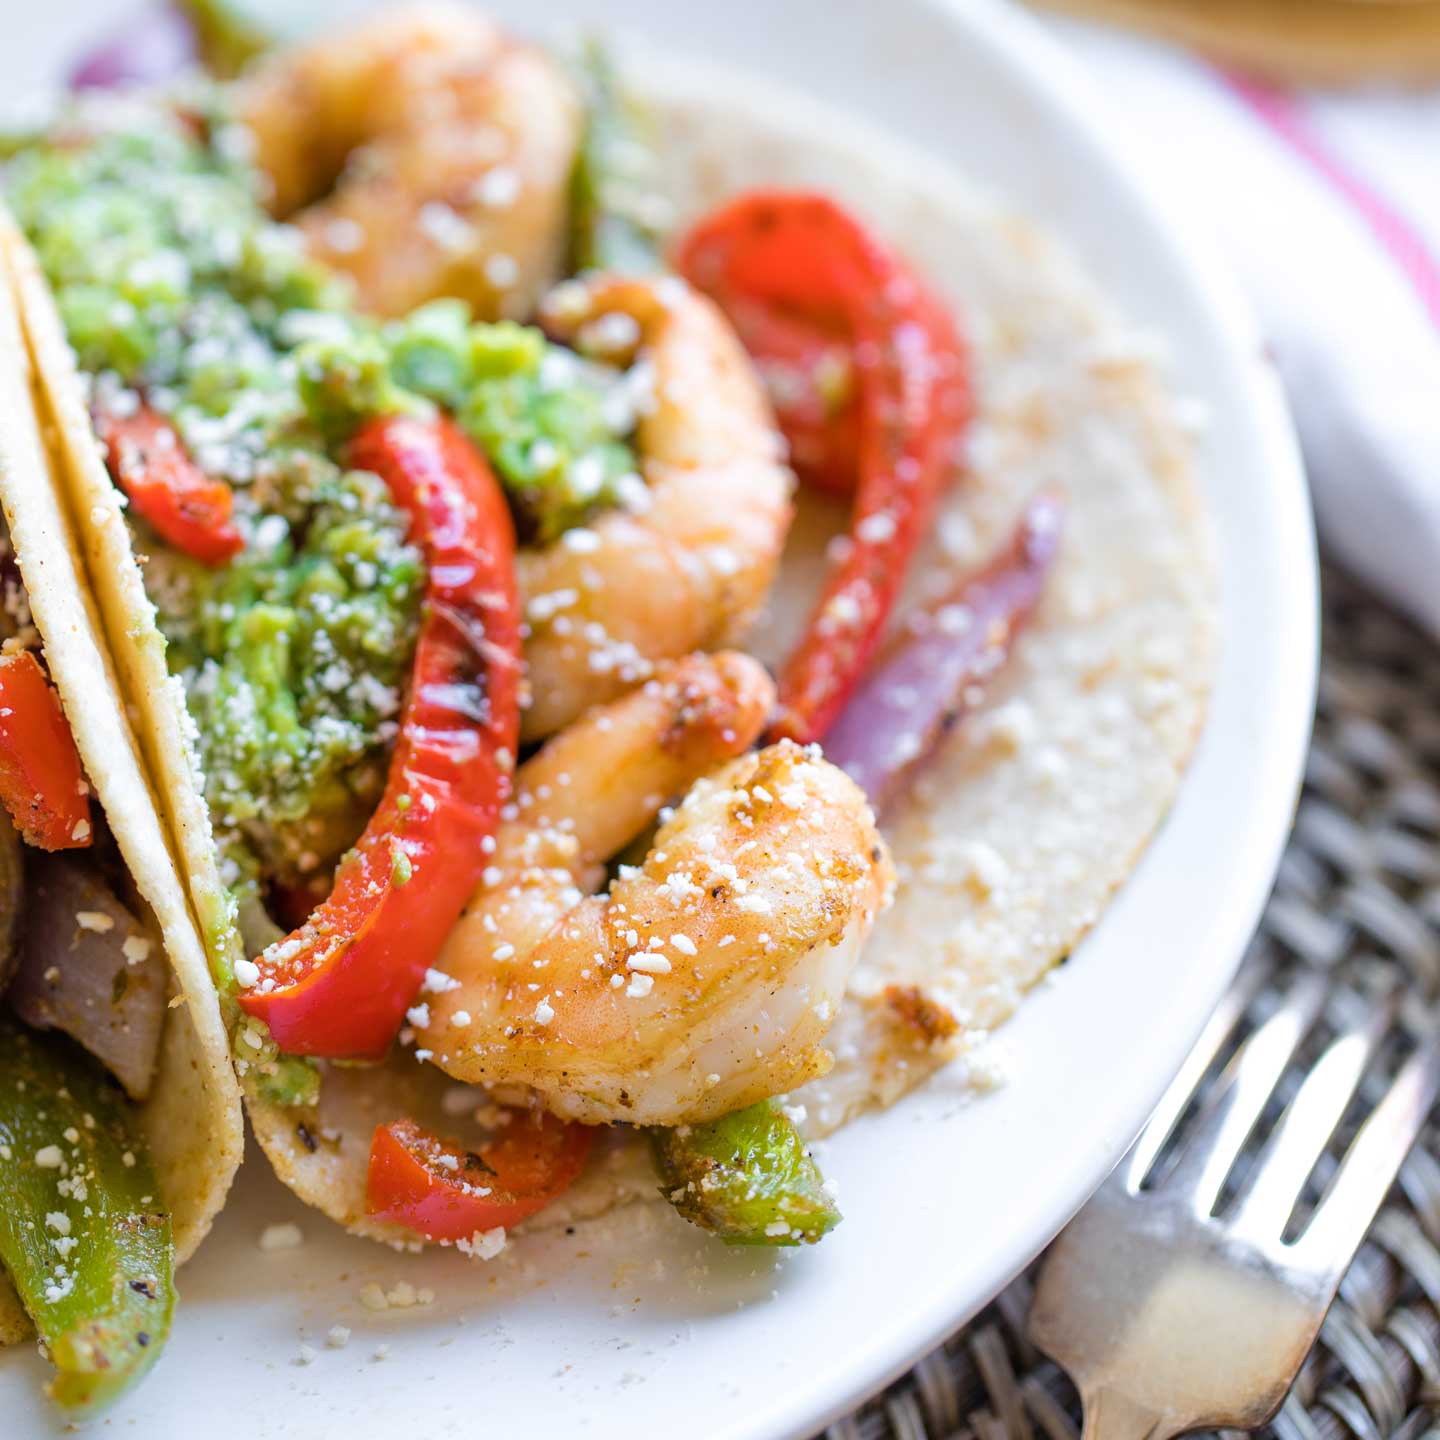 Closeup of a Mexican shrimp tucked into a fajita along with other veggies, guac and a dusting of cojita cheese.